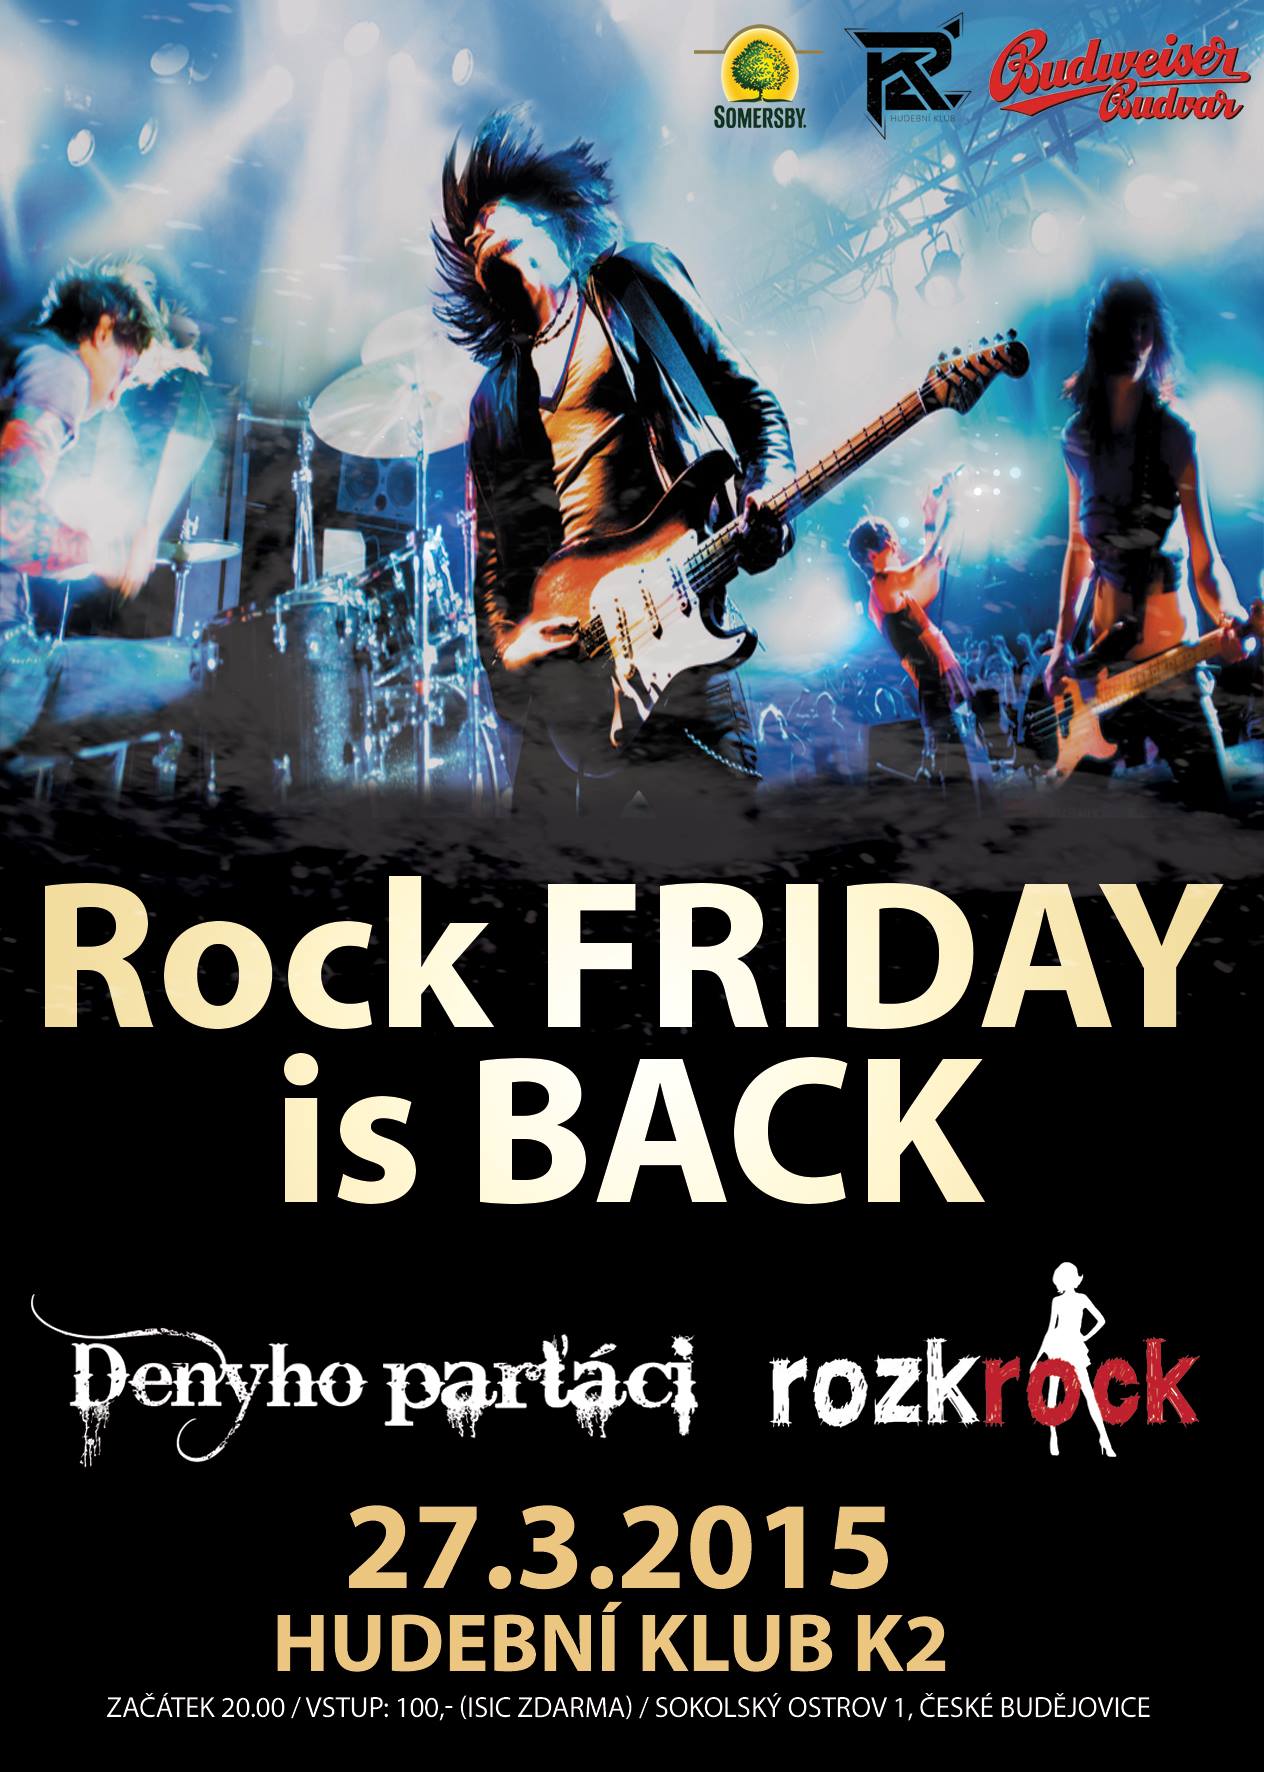 Rock friday is back